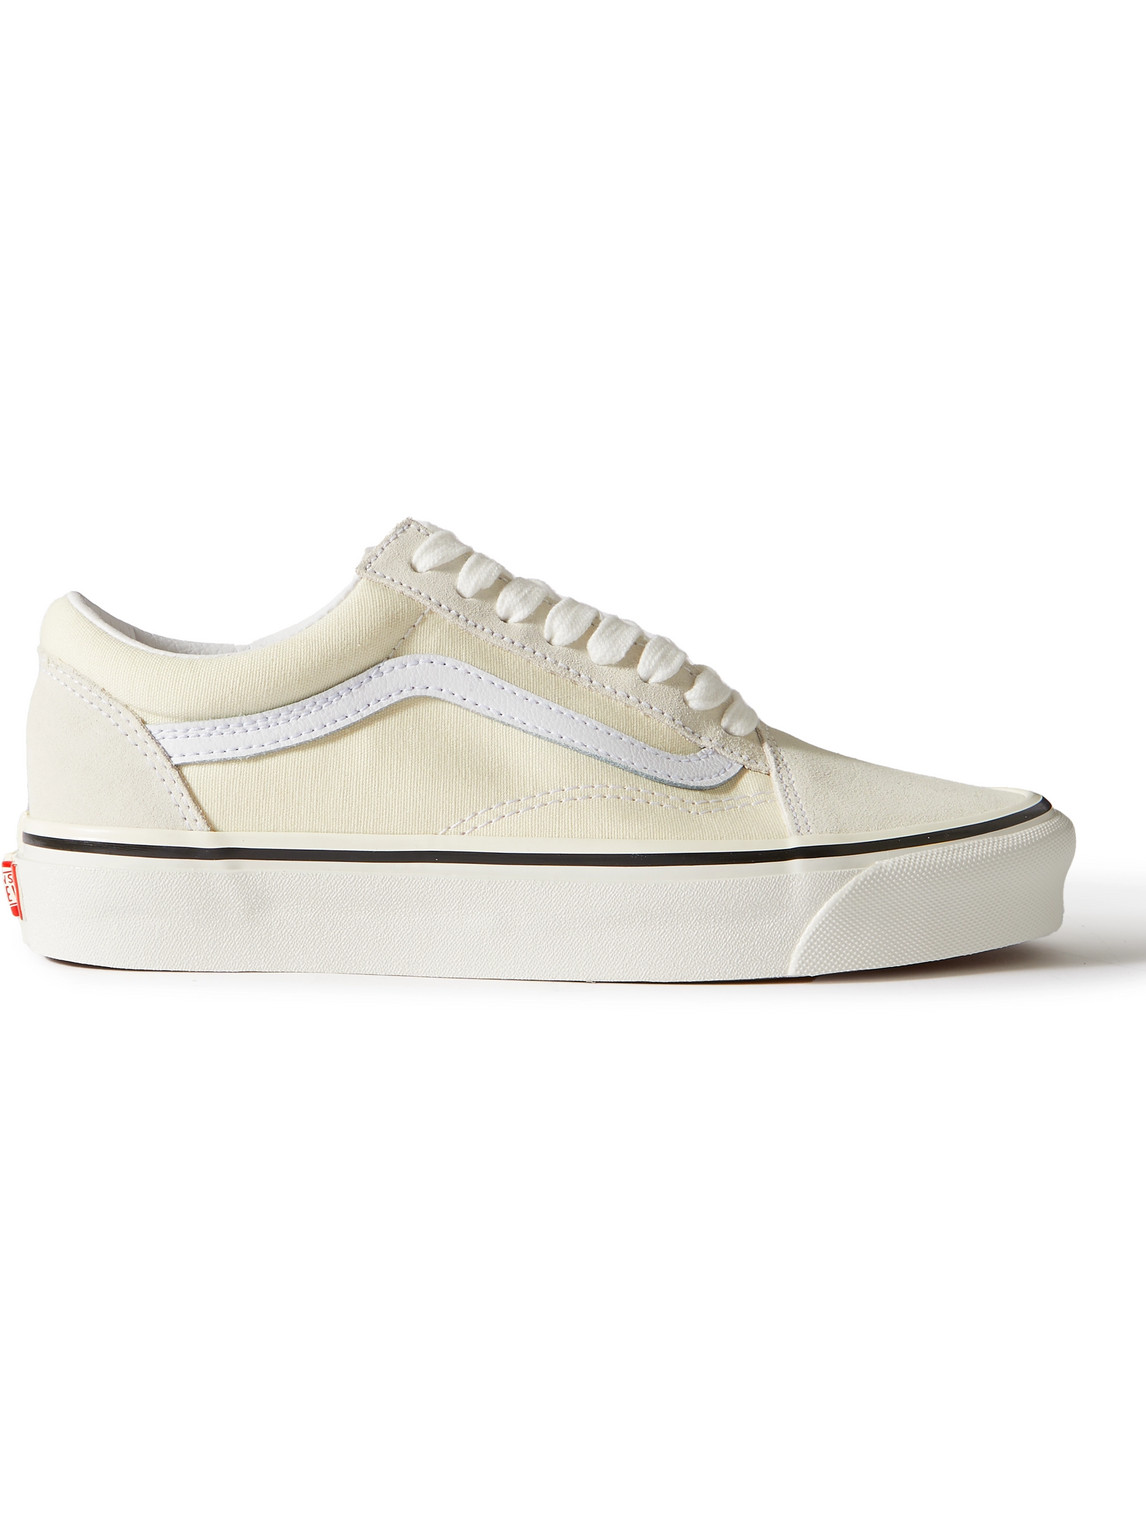 VANS OLD SKOOL 36 DX LEATHER-TRIMMED CANVAS AND SUEDE trainers